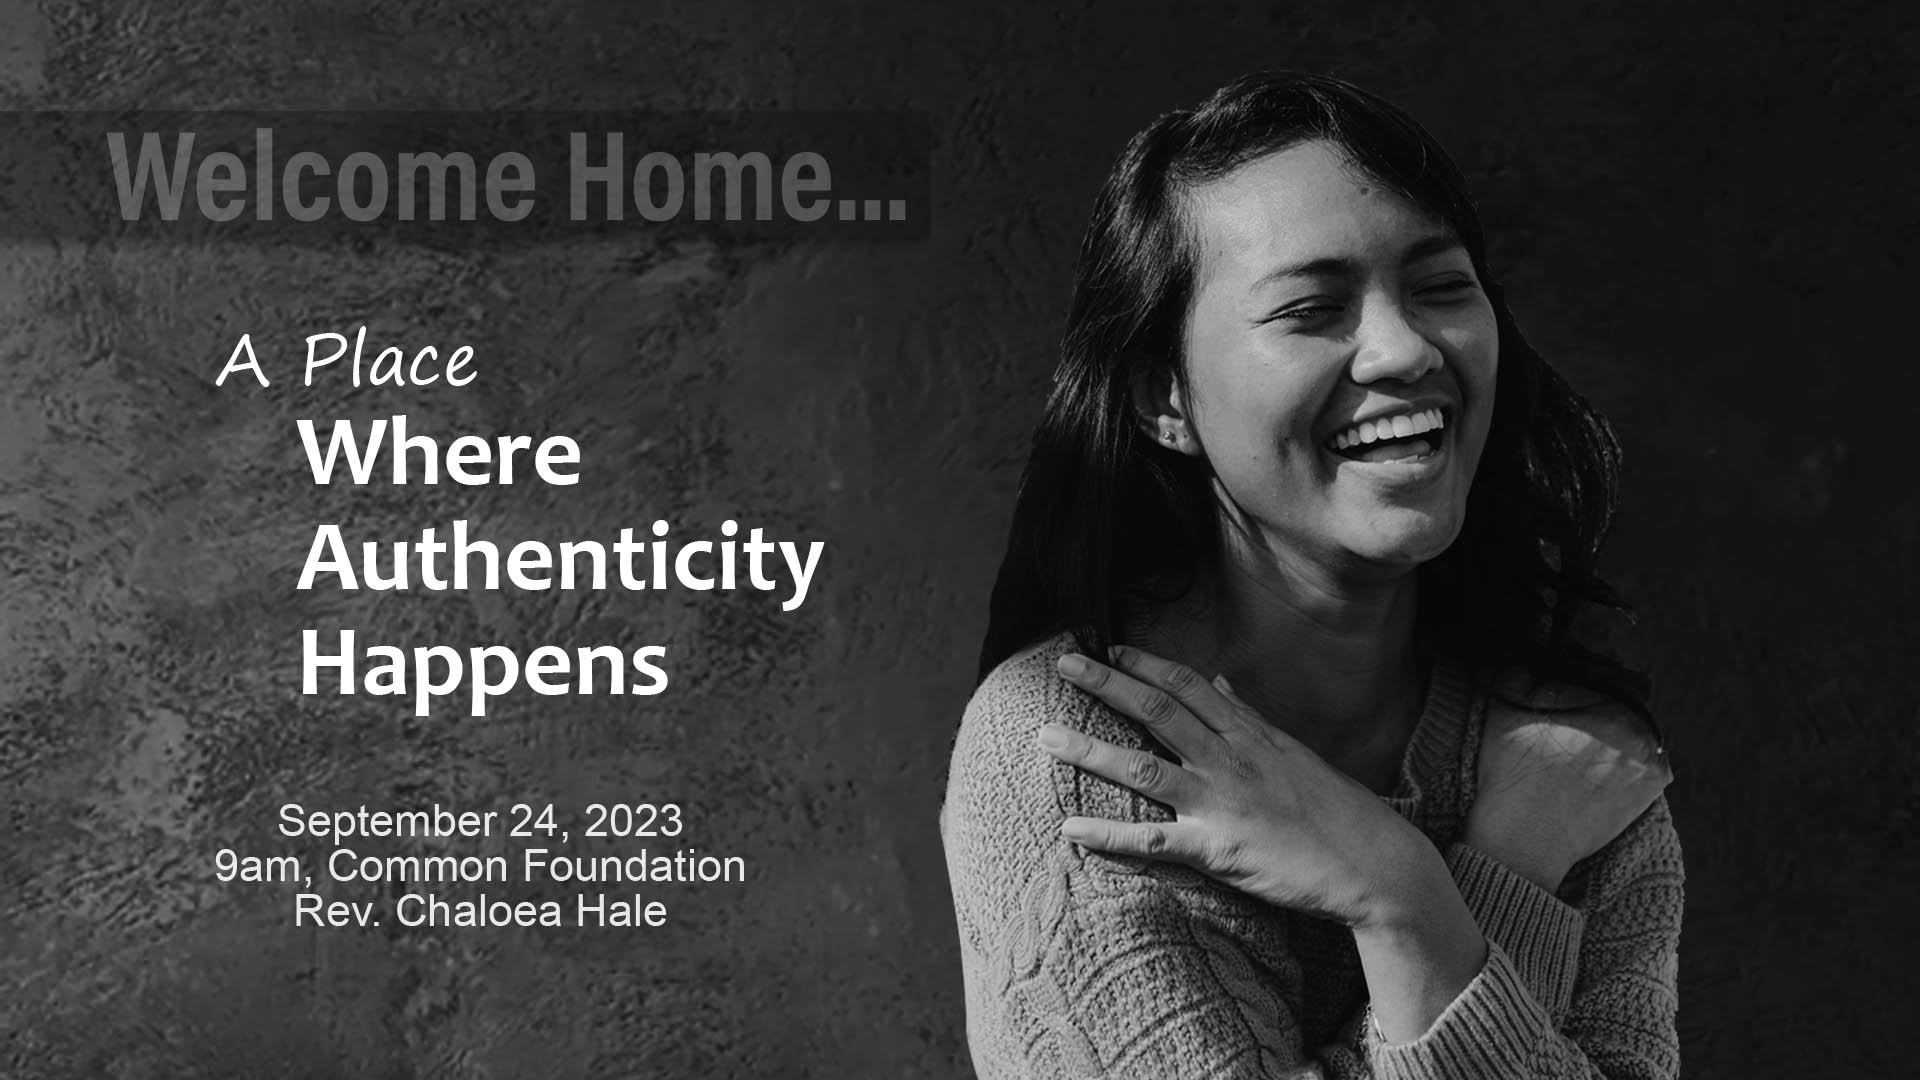 Welcome Home: A Place Where Authenticity Happens